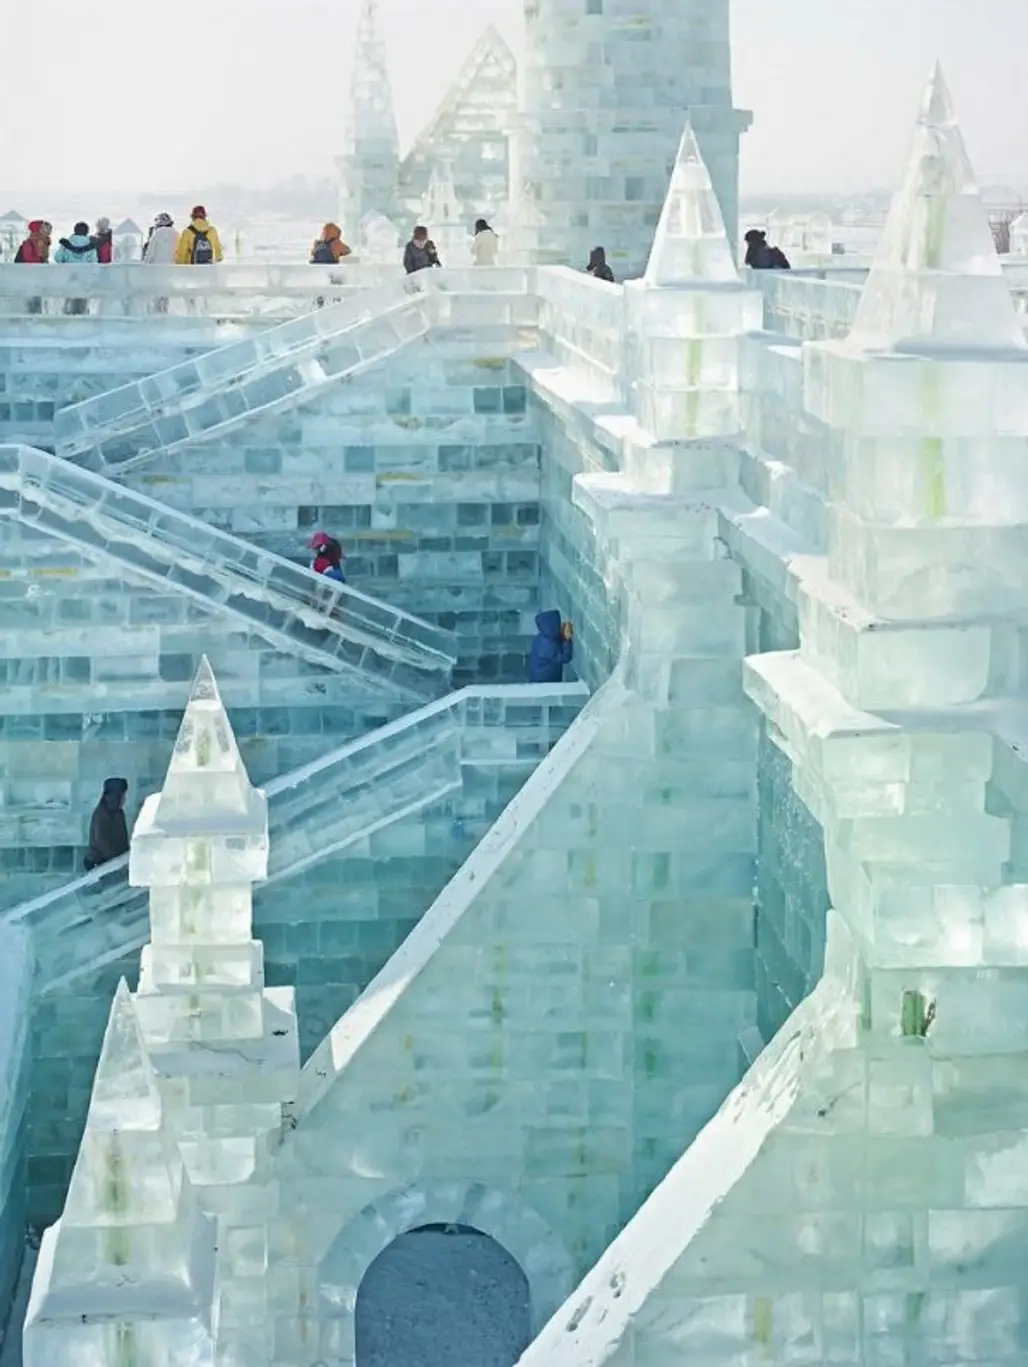 The Harbin International Ice and Snow Sculpture Festival in China